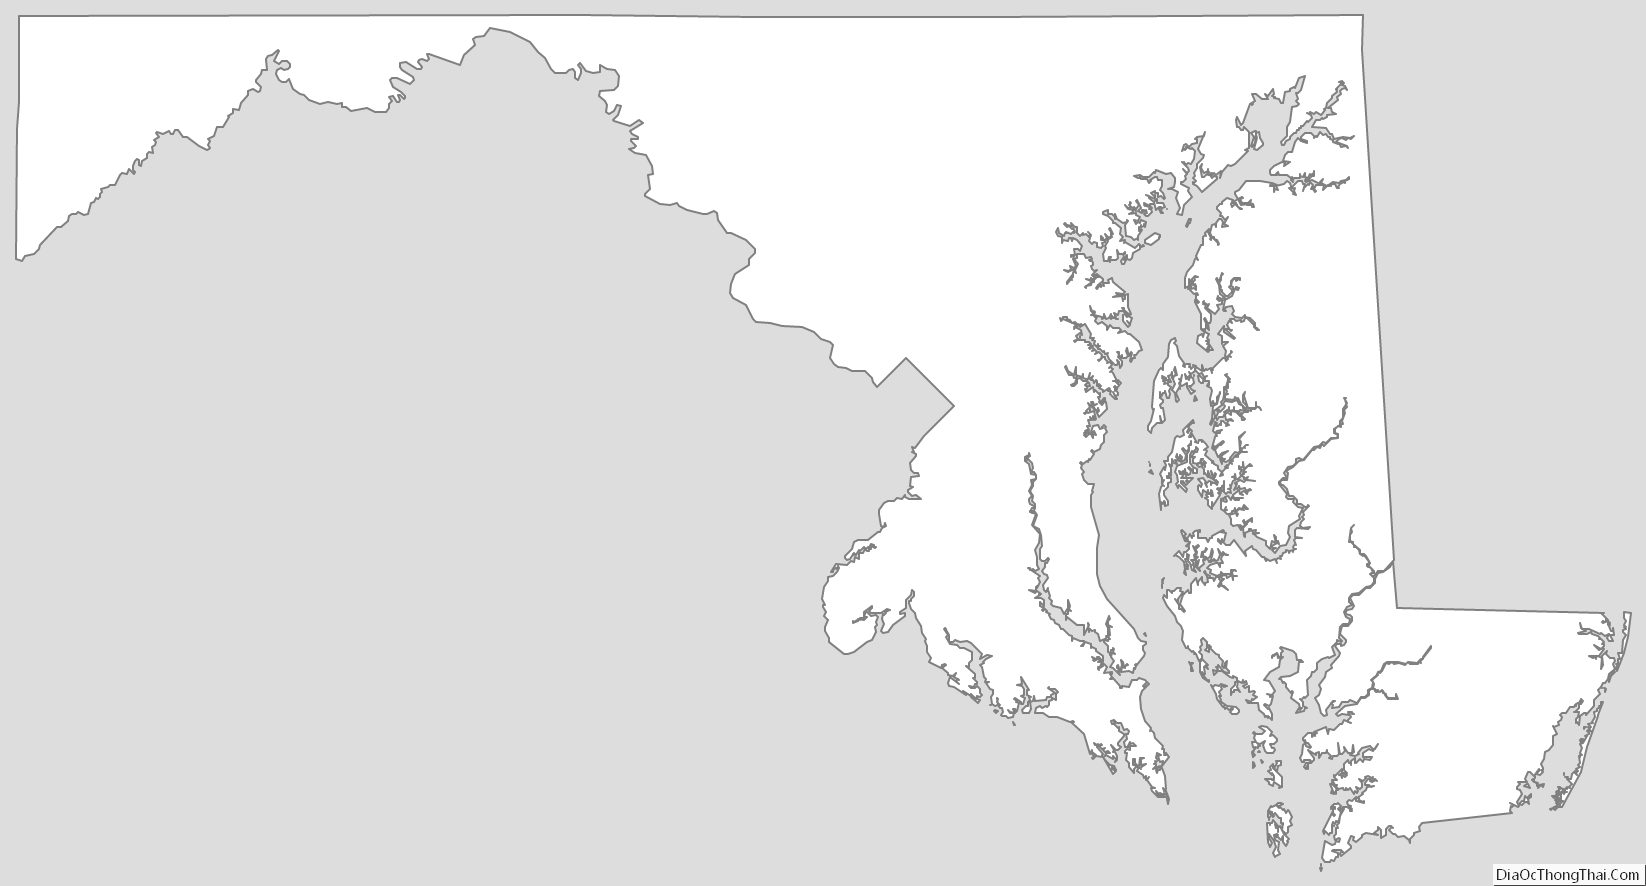 Maryland Outline Map